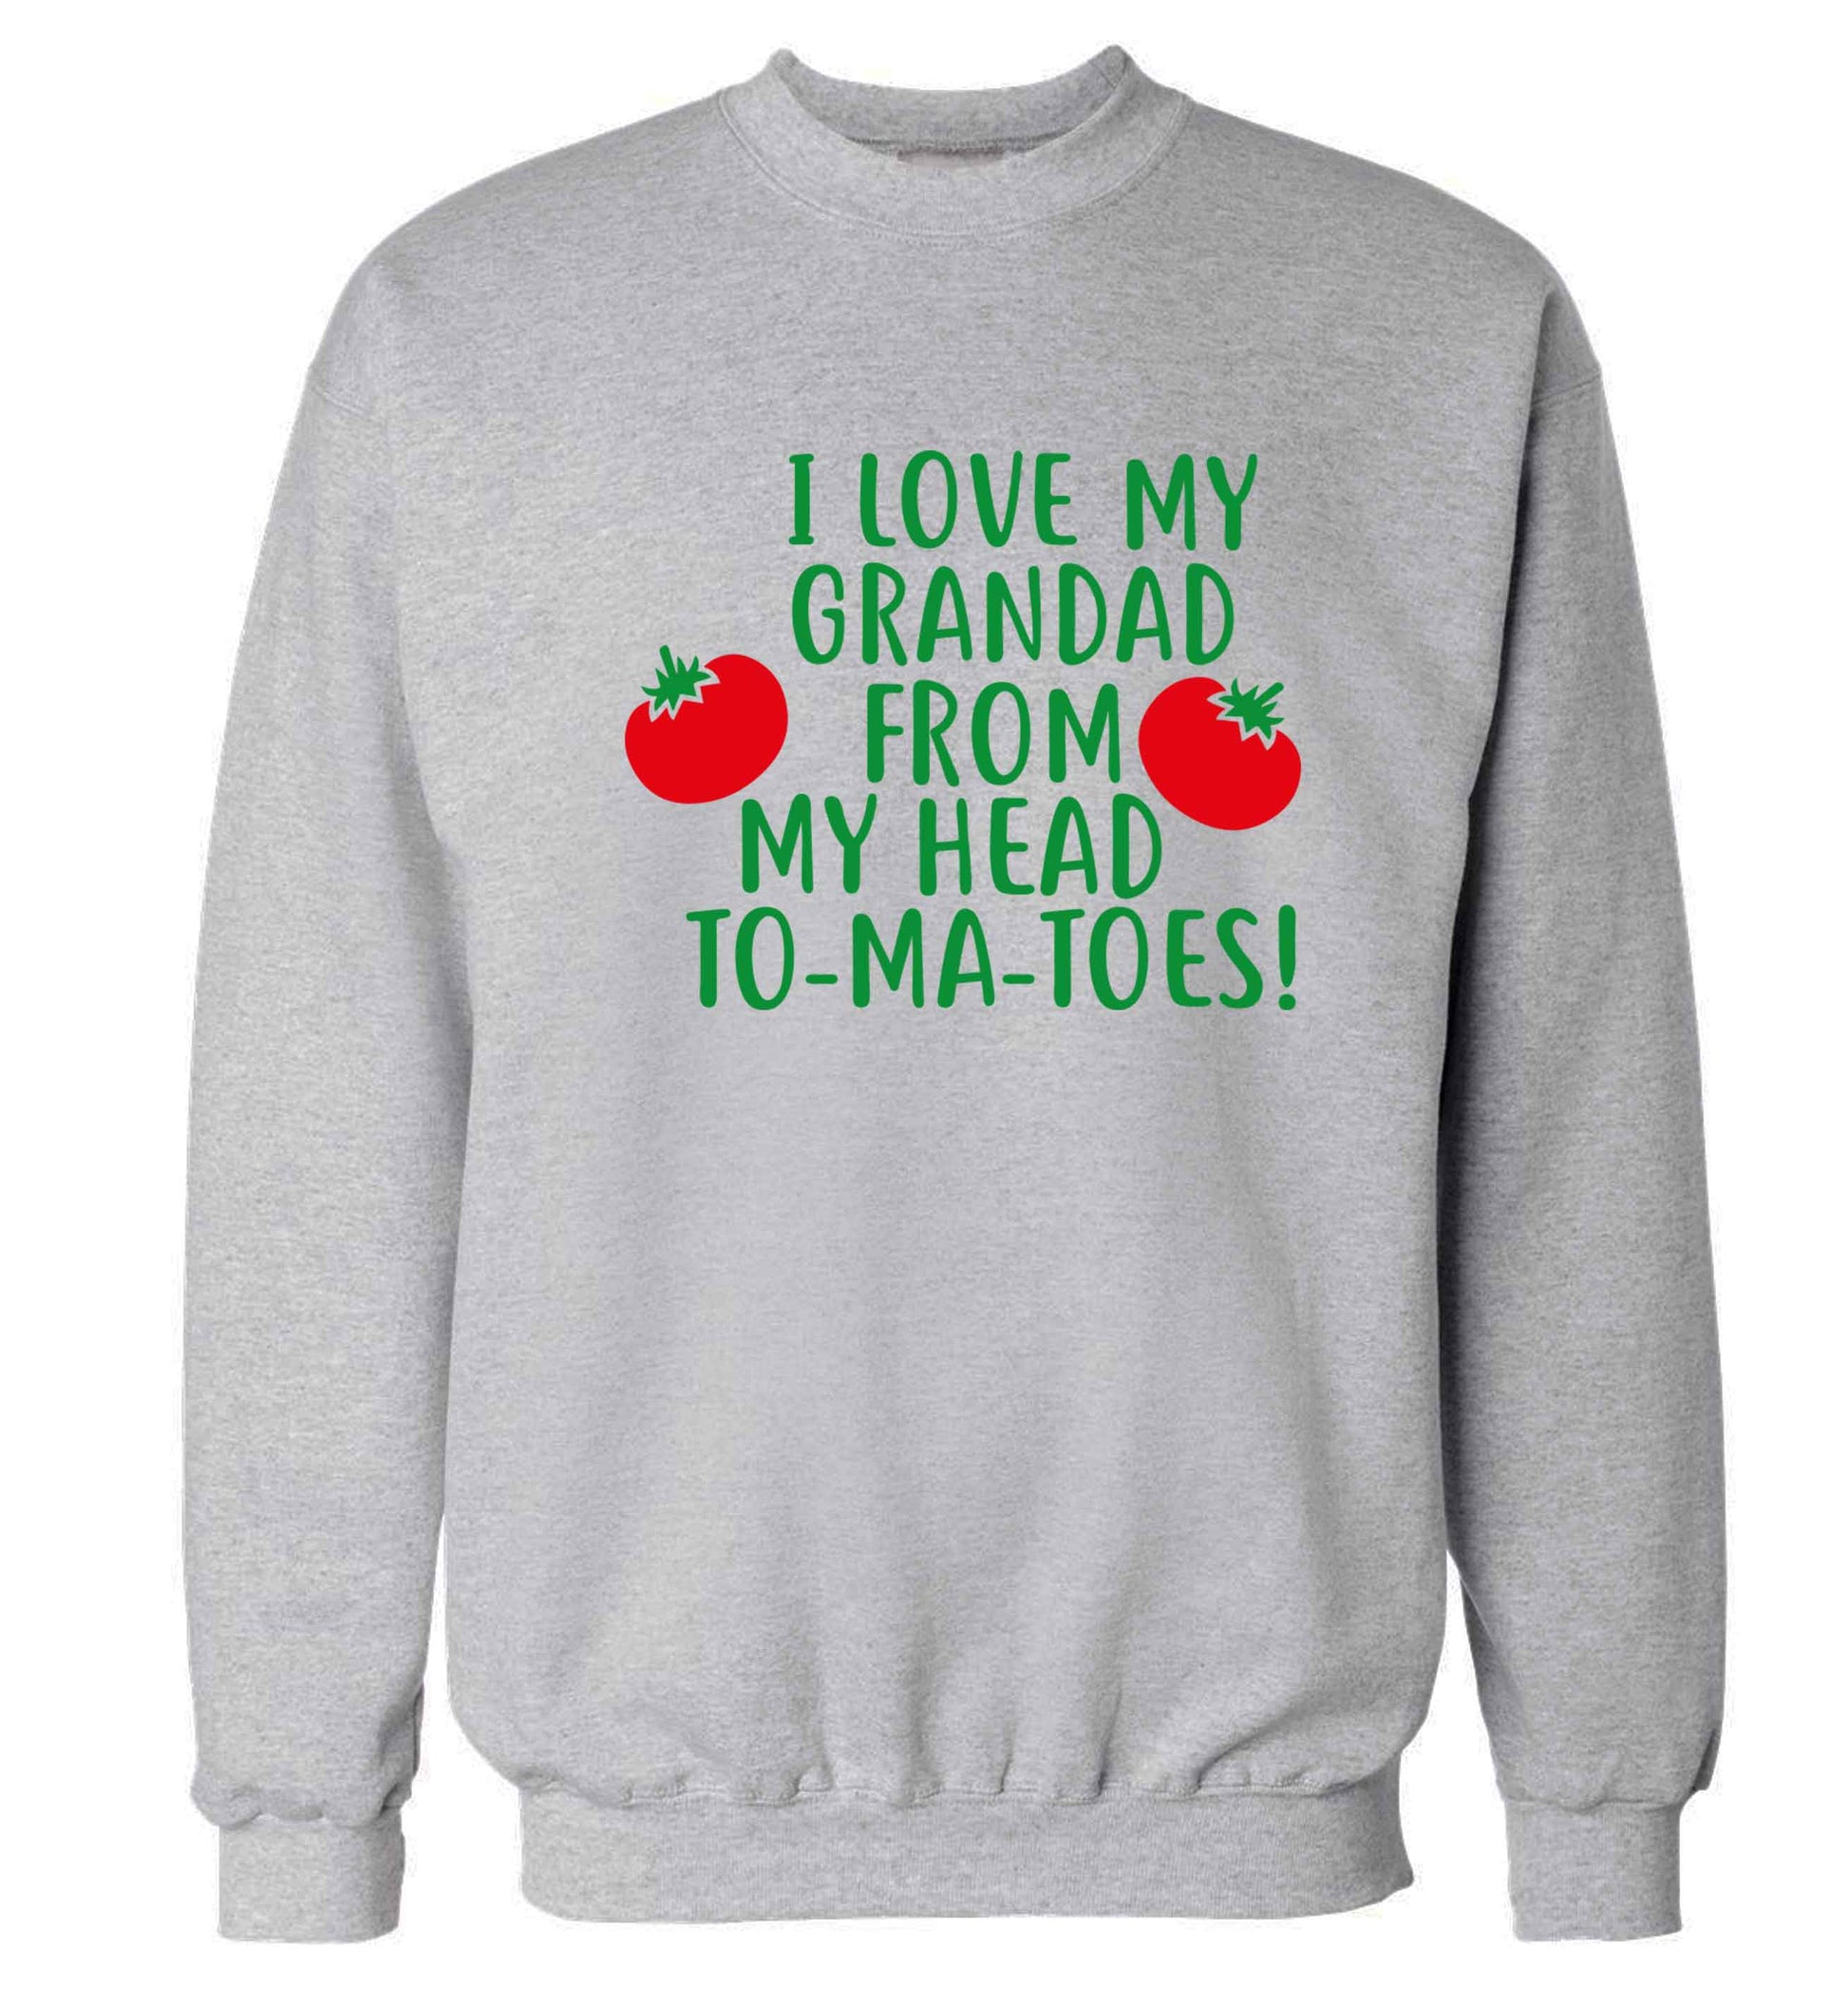 I love my grandad from my head To-Ma-Toes Adult's unisex grey Sweater 2XL